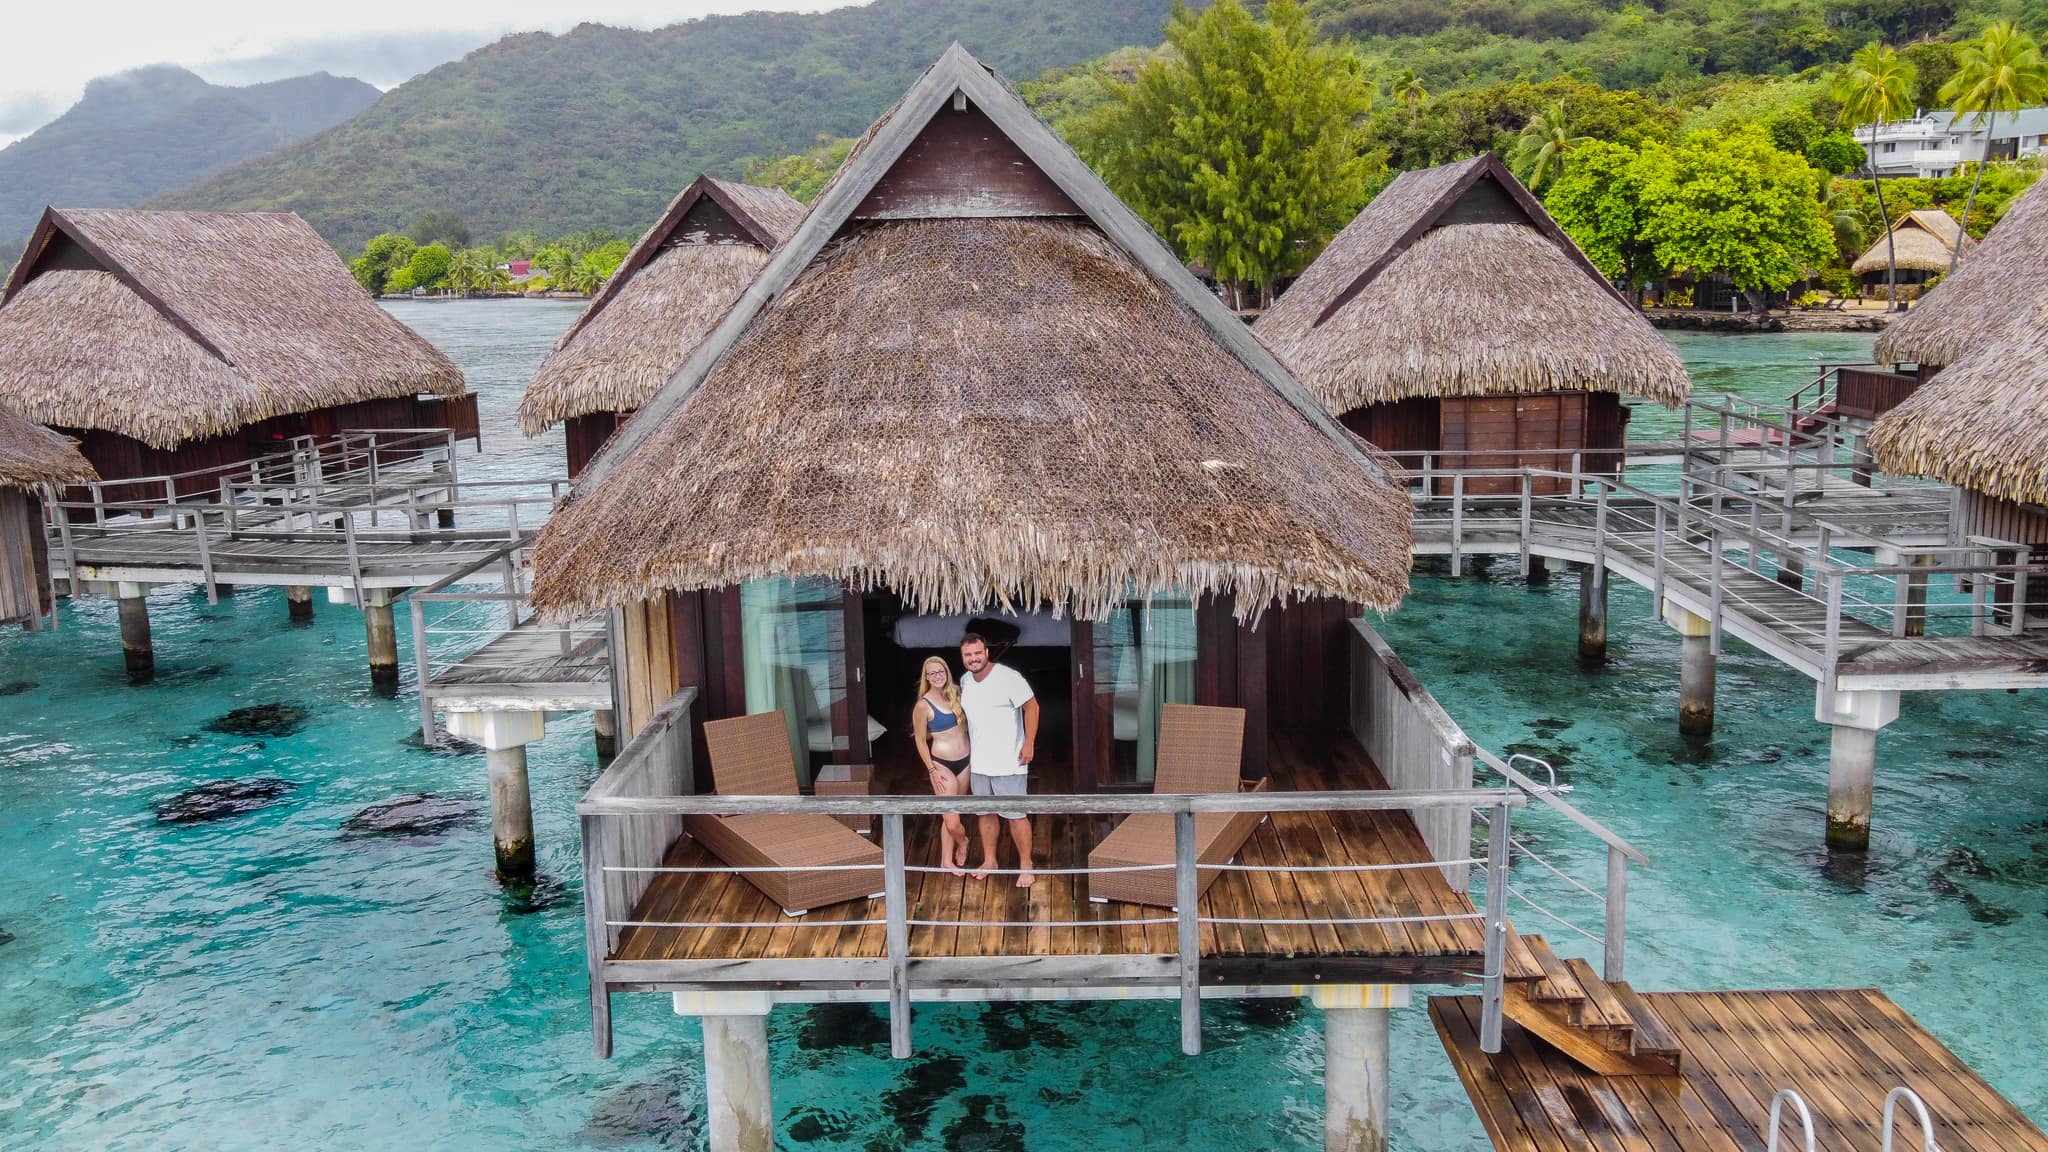 A couple in an overwater bungalow in Moorea, French Polynesia